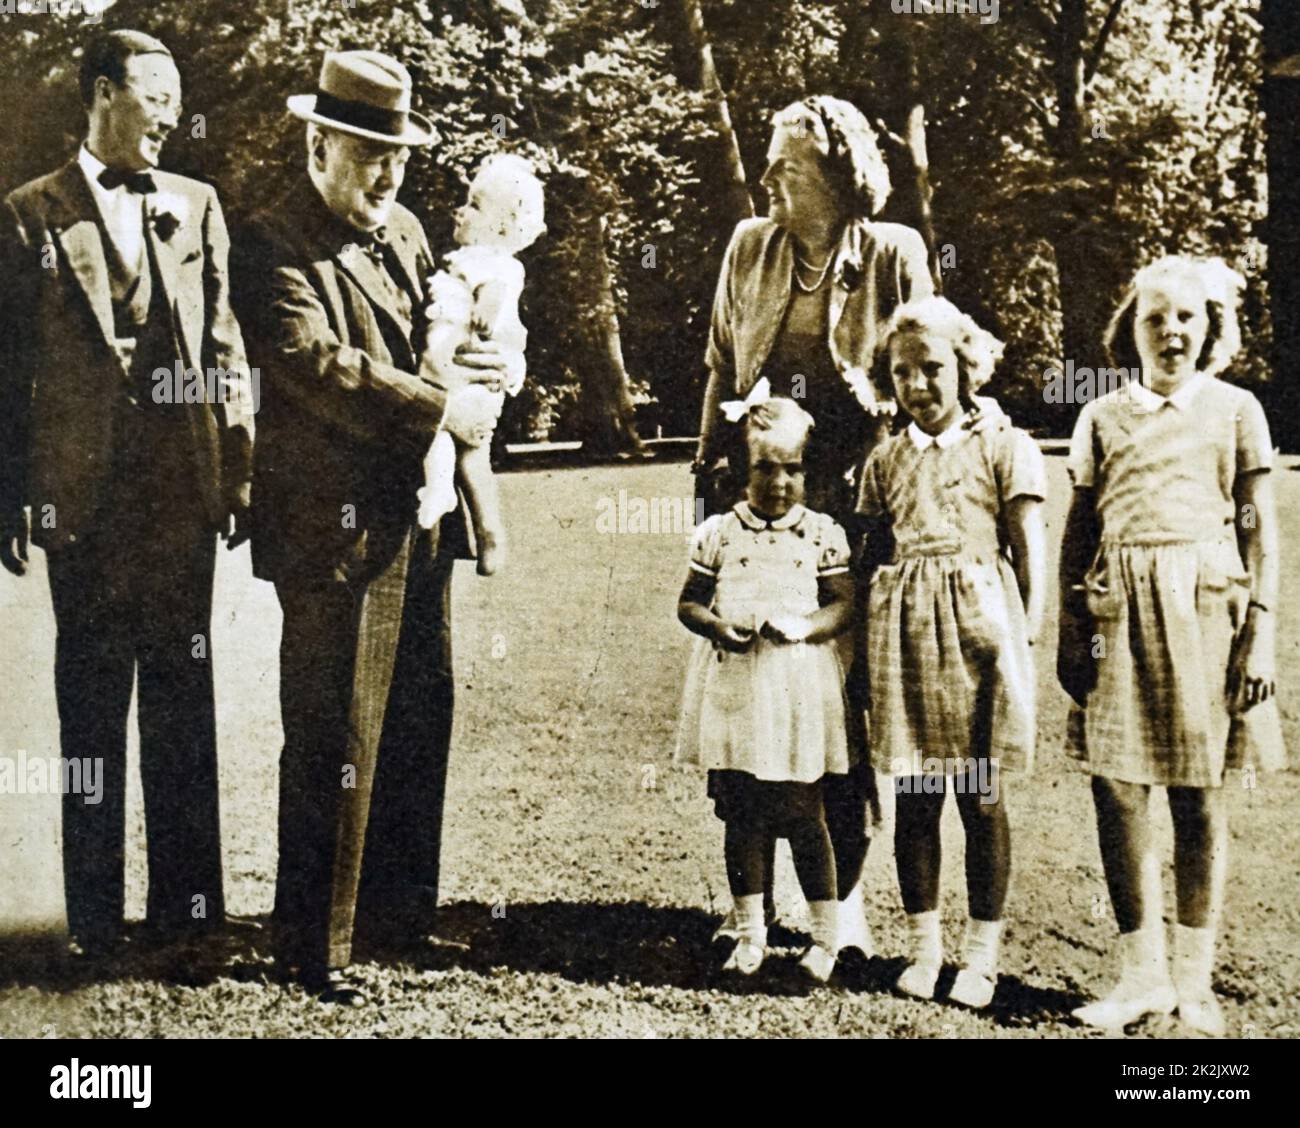 Photograph of Princess Juliana of the Netherlands (1909-2004), Sir Winston Churchill (1874-1965) and Prince Bernhard of Lippe-Biesterfeld (1911-2004) with their children. Dated 20th Century Stock Photo